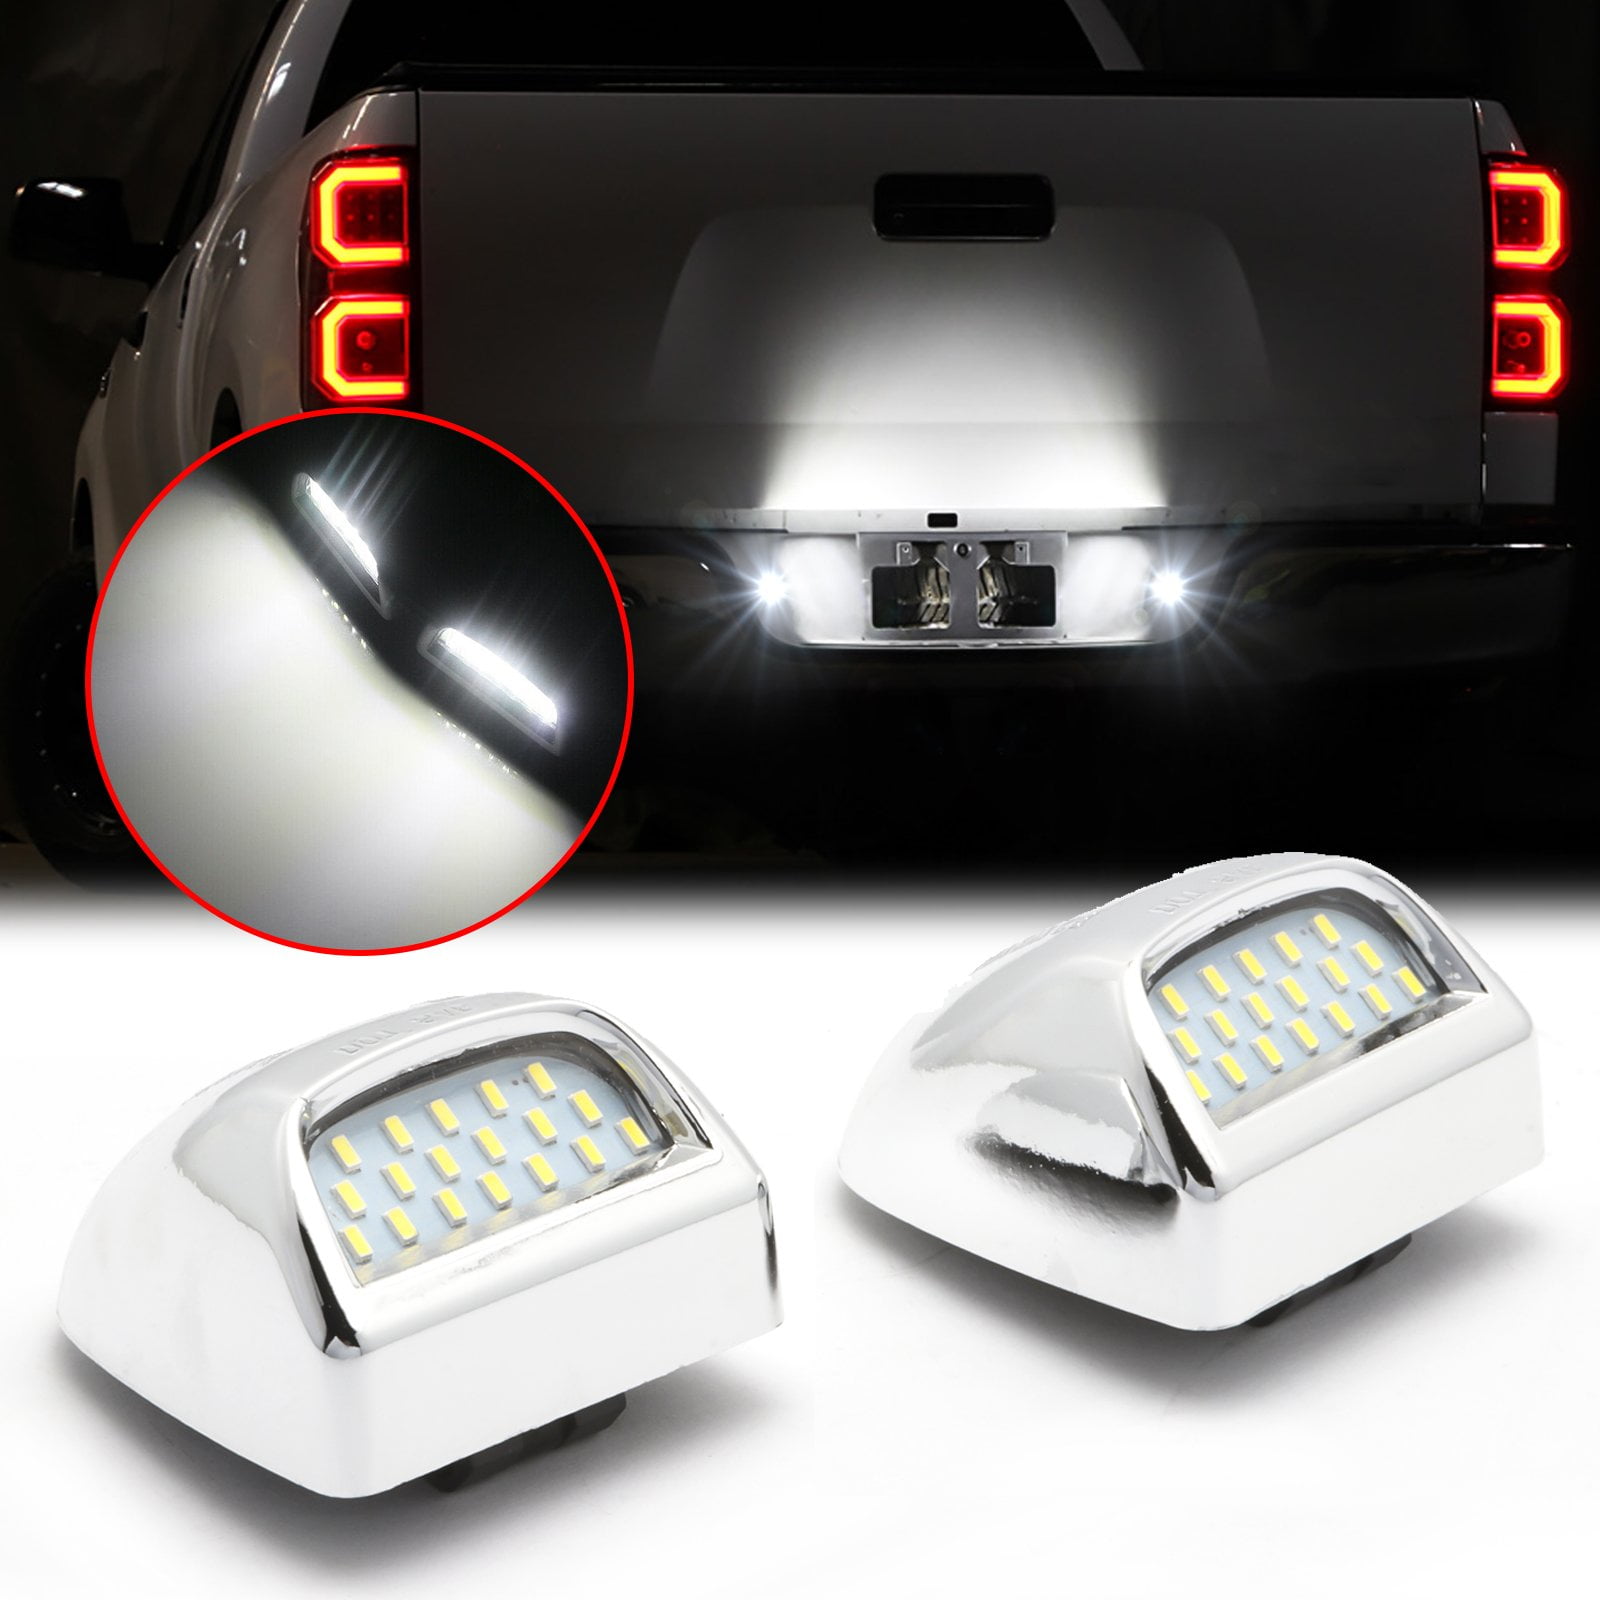 New License Plate Light LED License Plate Tag Lamp Assembly For Ford F150  F250 F350 12V 6000k P3T7 Wholesale Available From 5,69 €